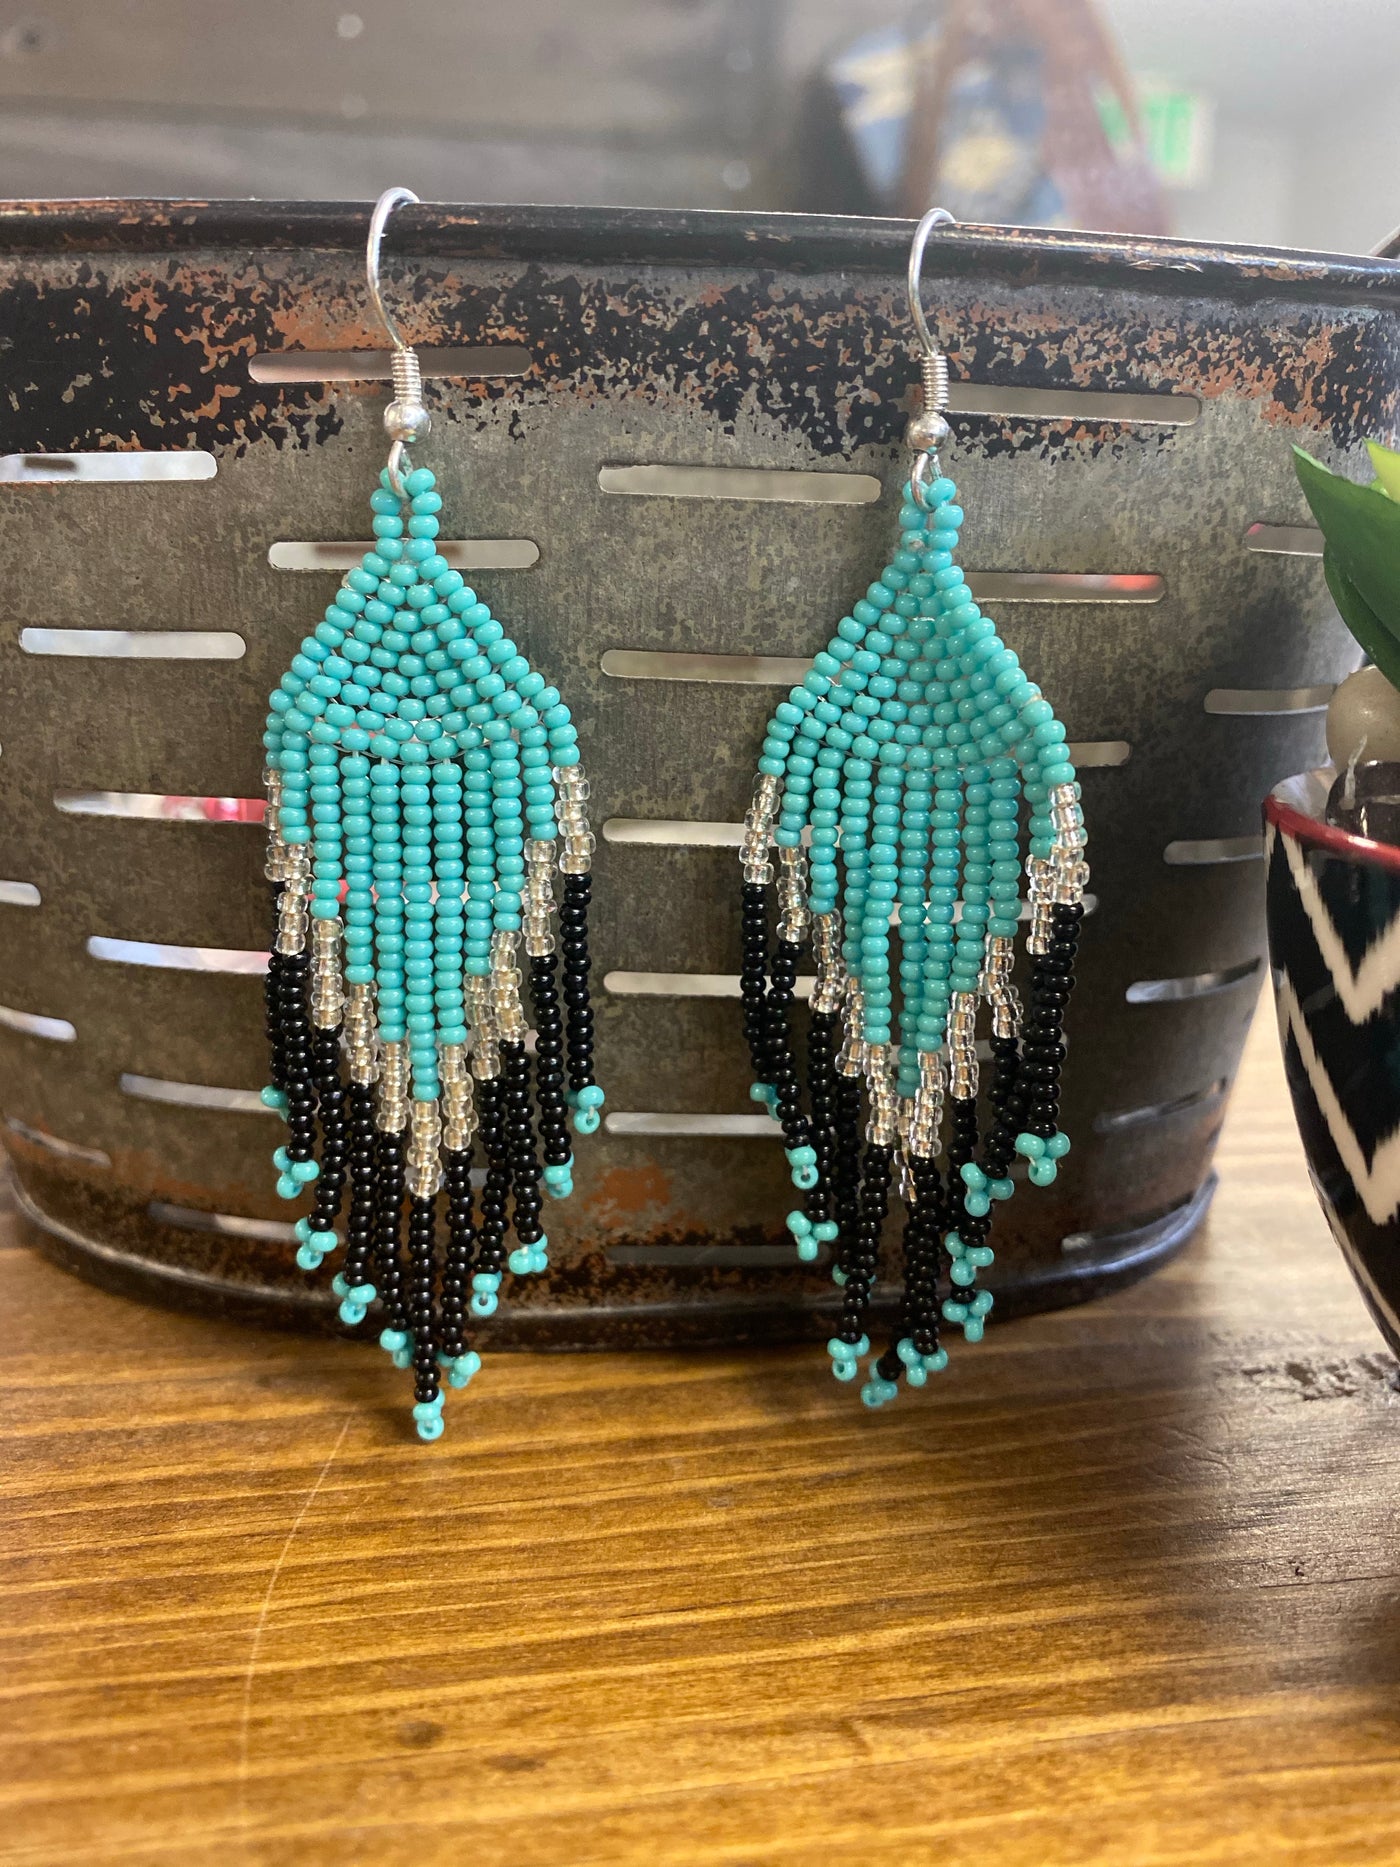 The Paige Beaded Earrings